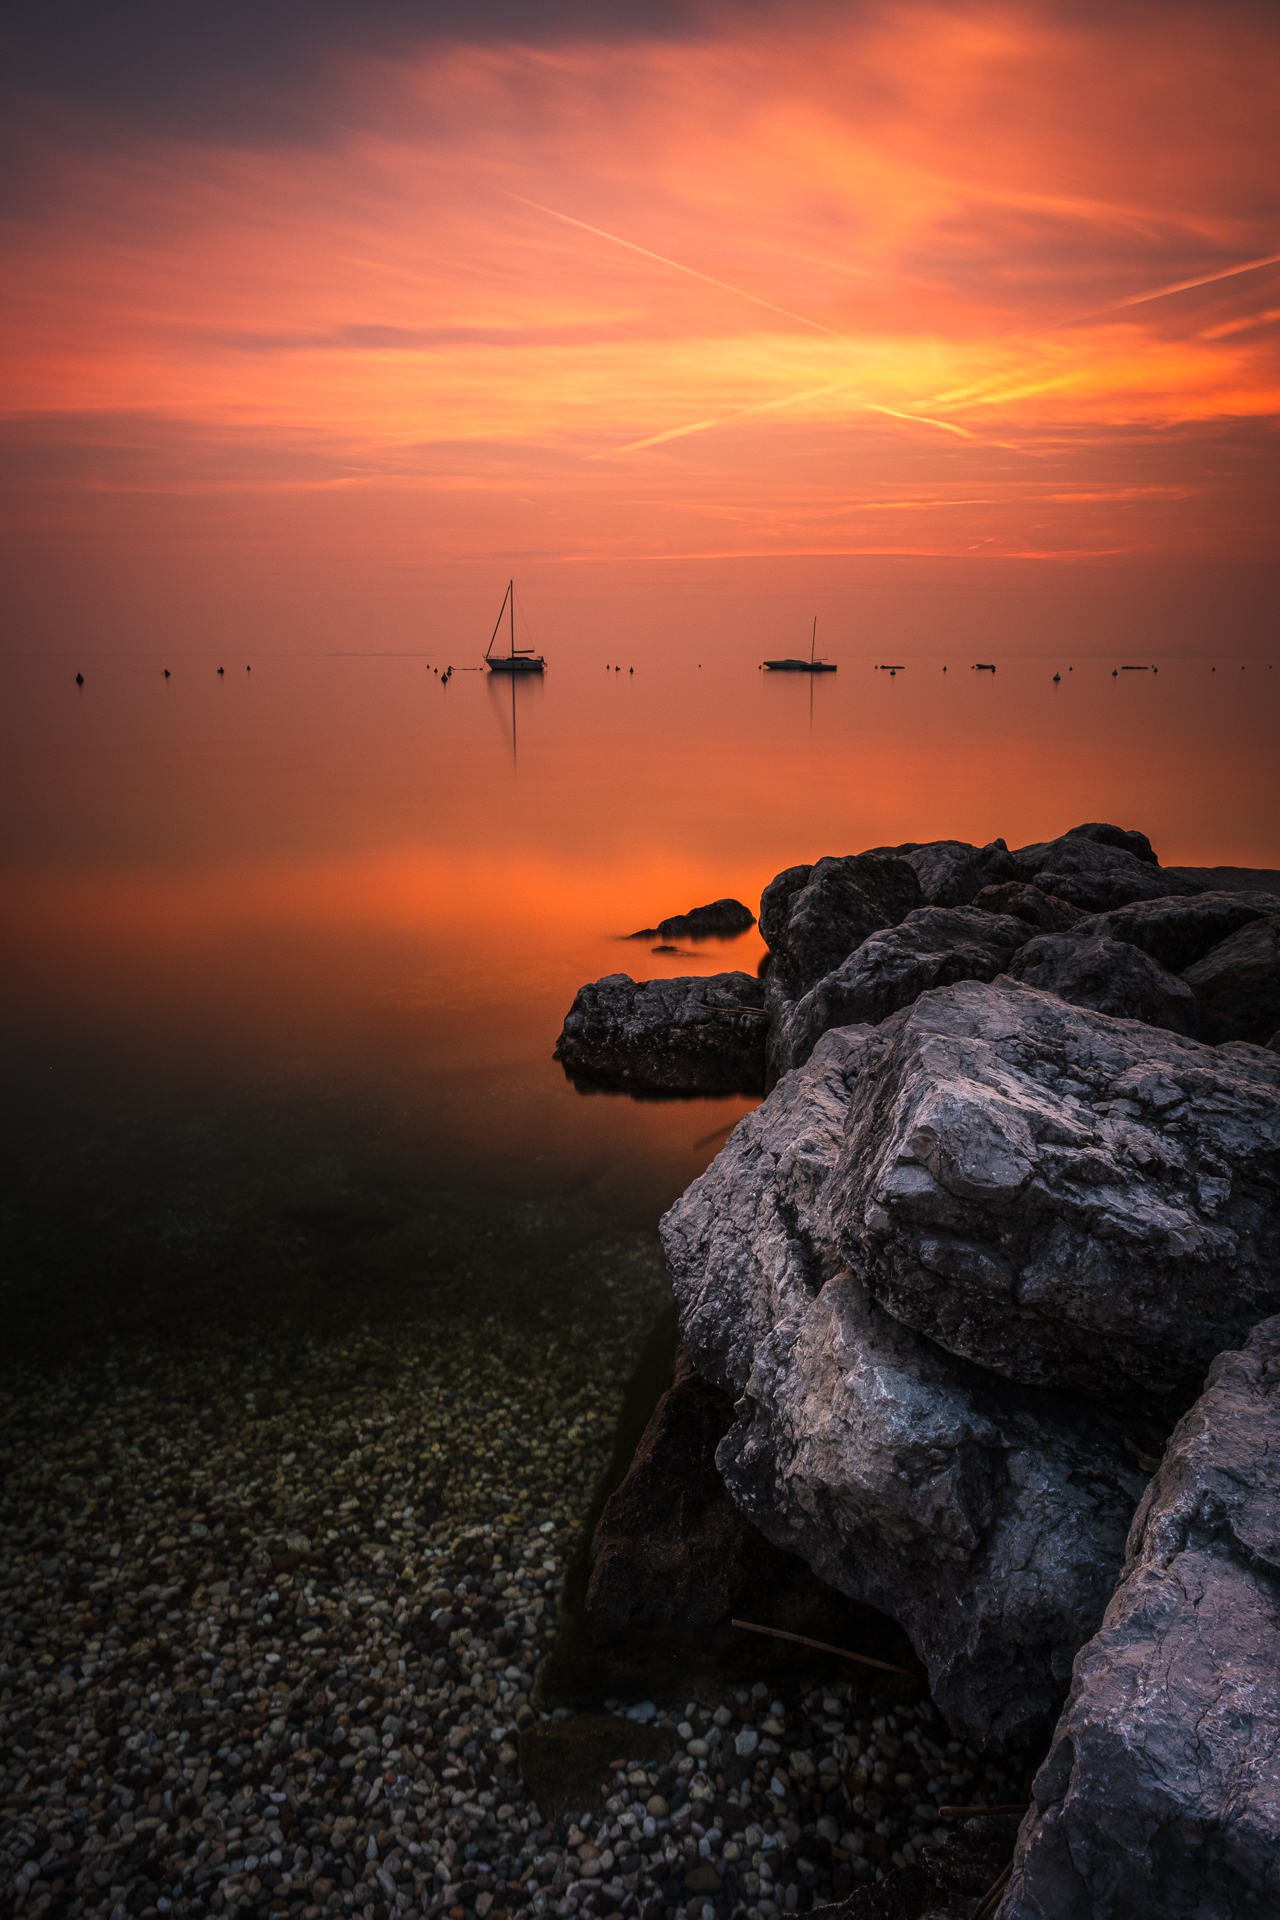 Sunset on Lake Garda, a moment suspended in eternity...